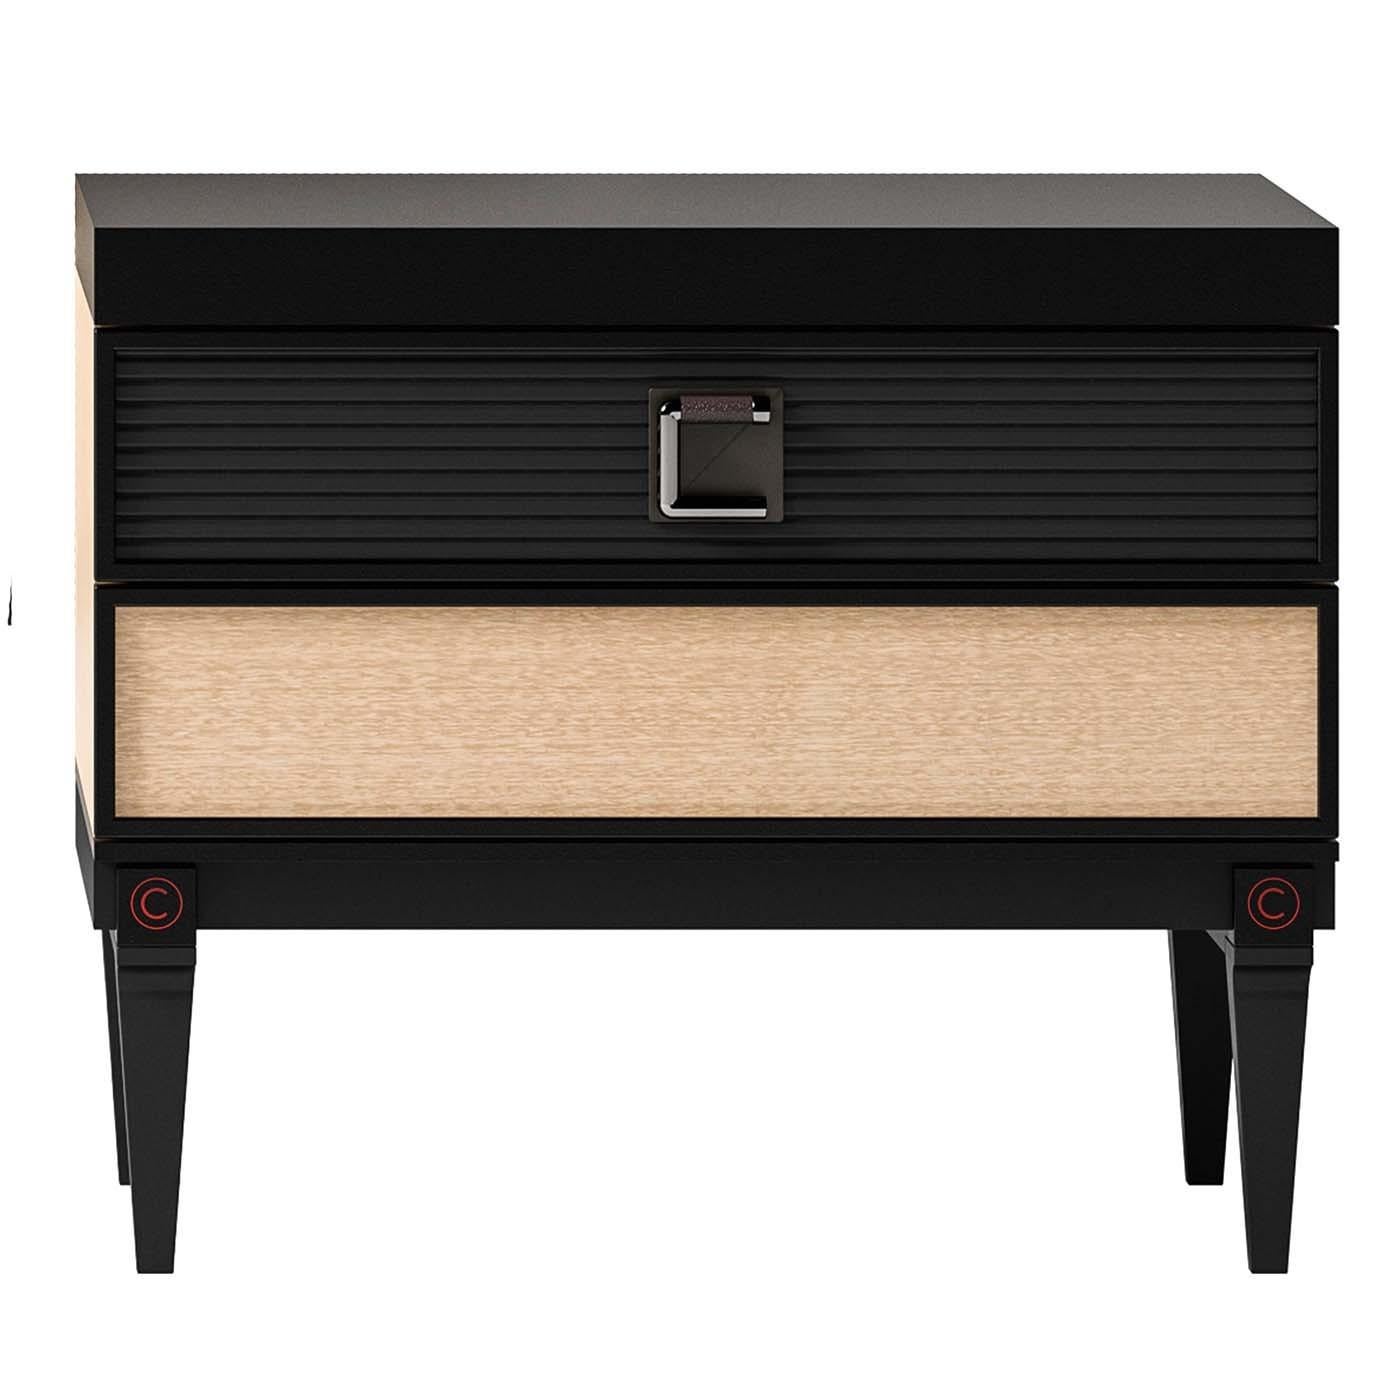 Functional yet elegant, this superb bedside table is inspired by traditional midcentury designs with a sculpted frame and neatly tapered legs. With a stunning eucalyptus veneer, the frame features a black-lacquered finish with beige panels on the